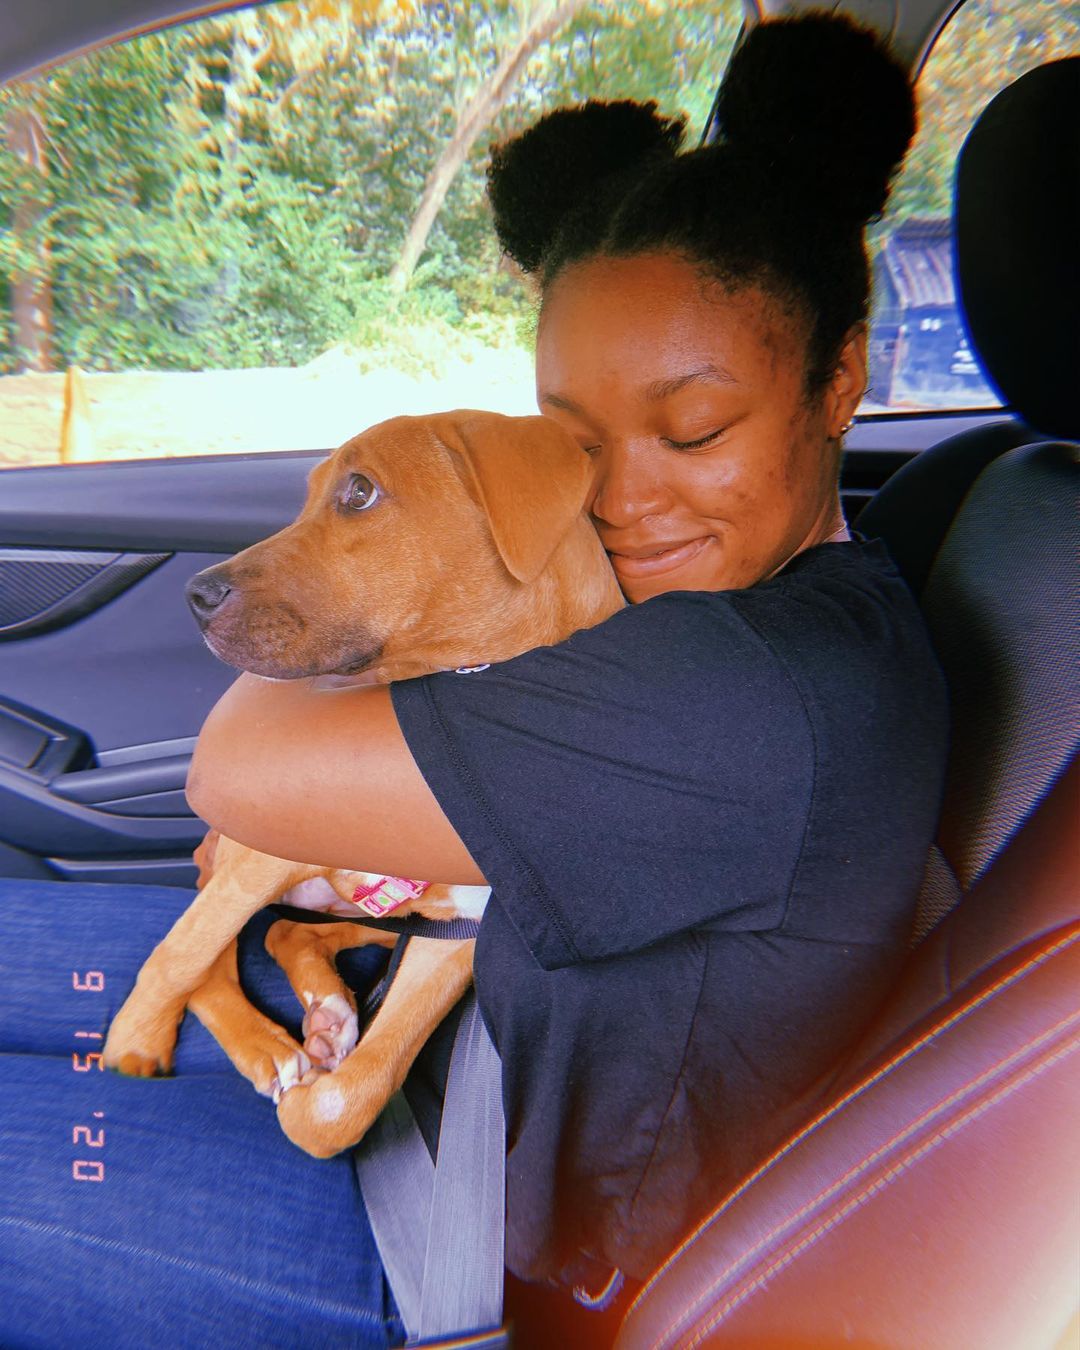 Woman hugging her dog in the car